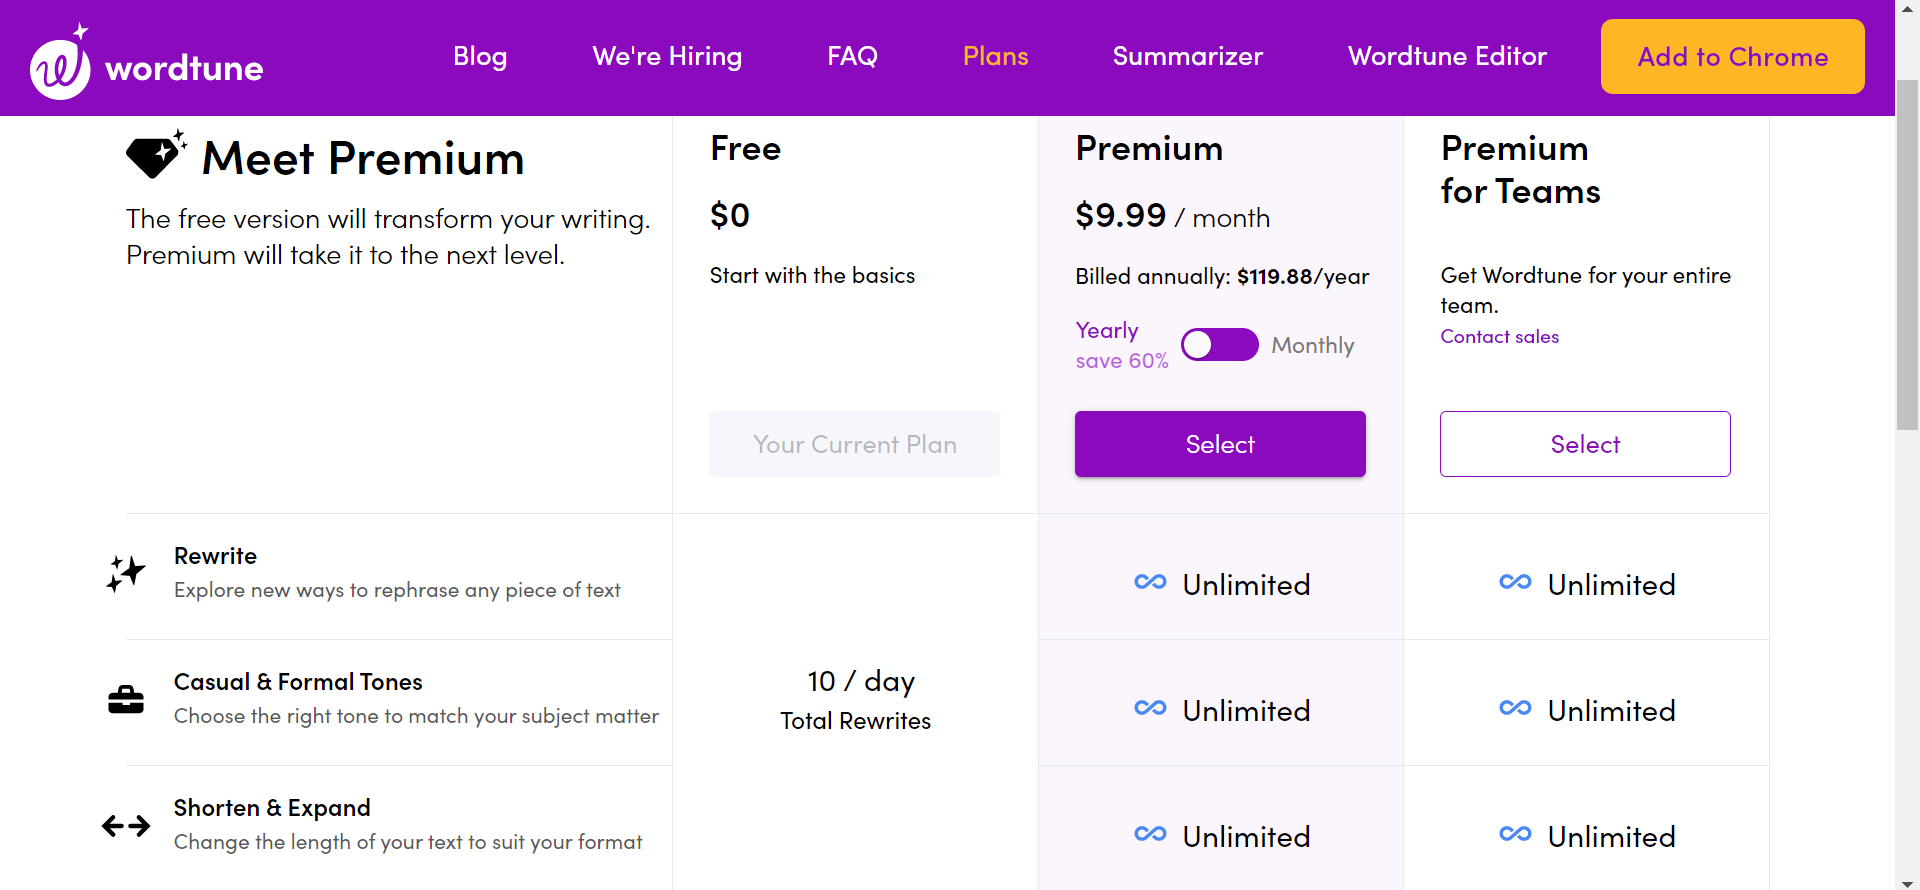 Wordtune's Pricing Model